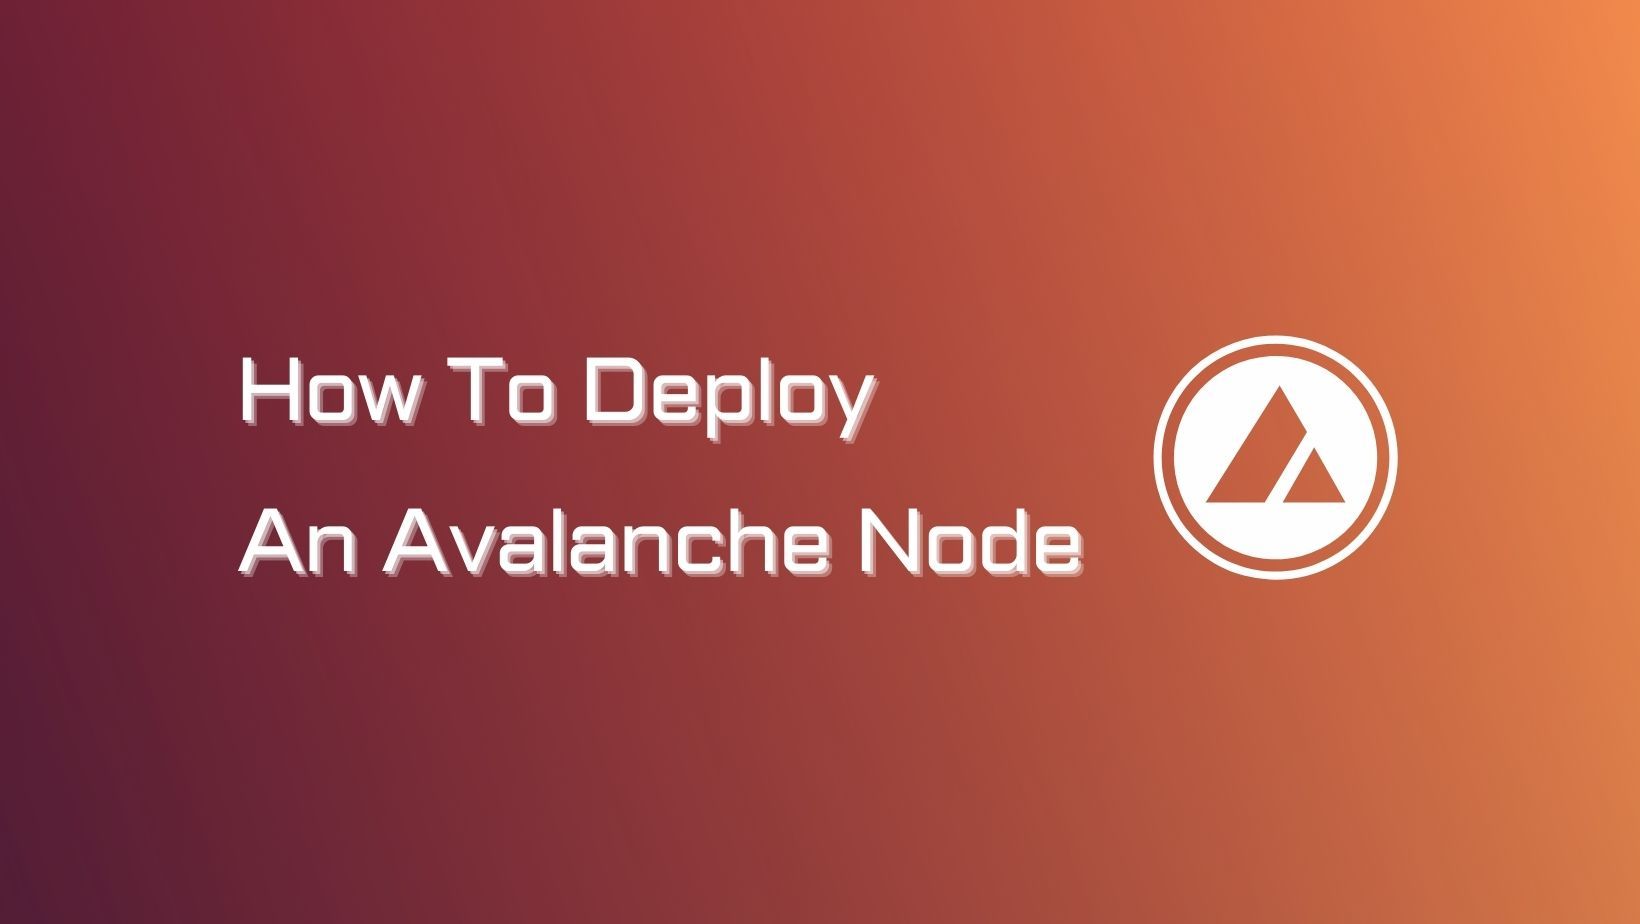 How to Deploy an Avalanche Node